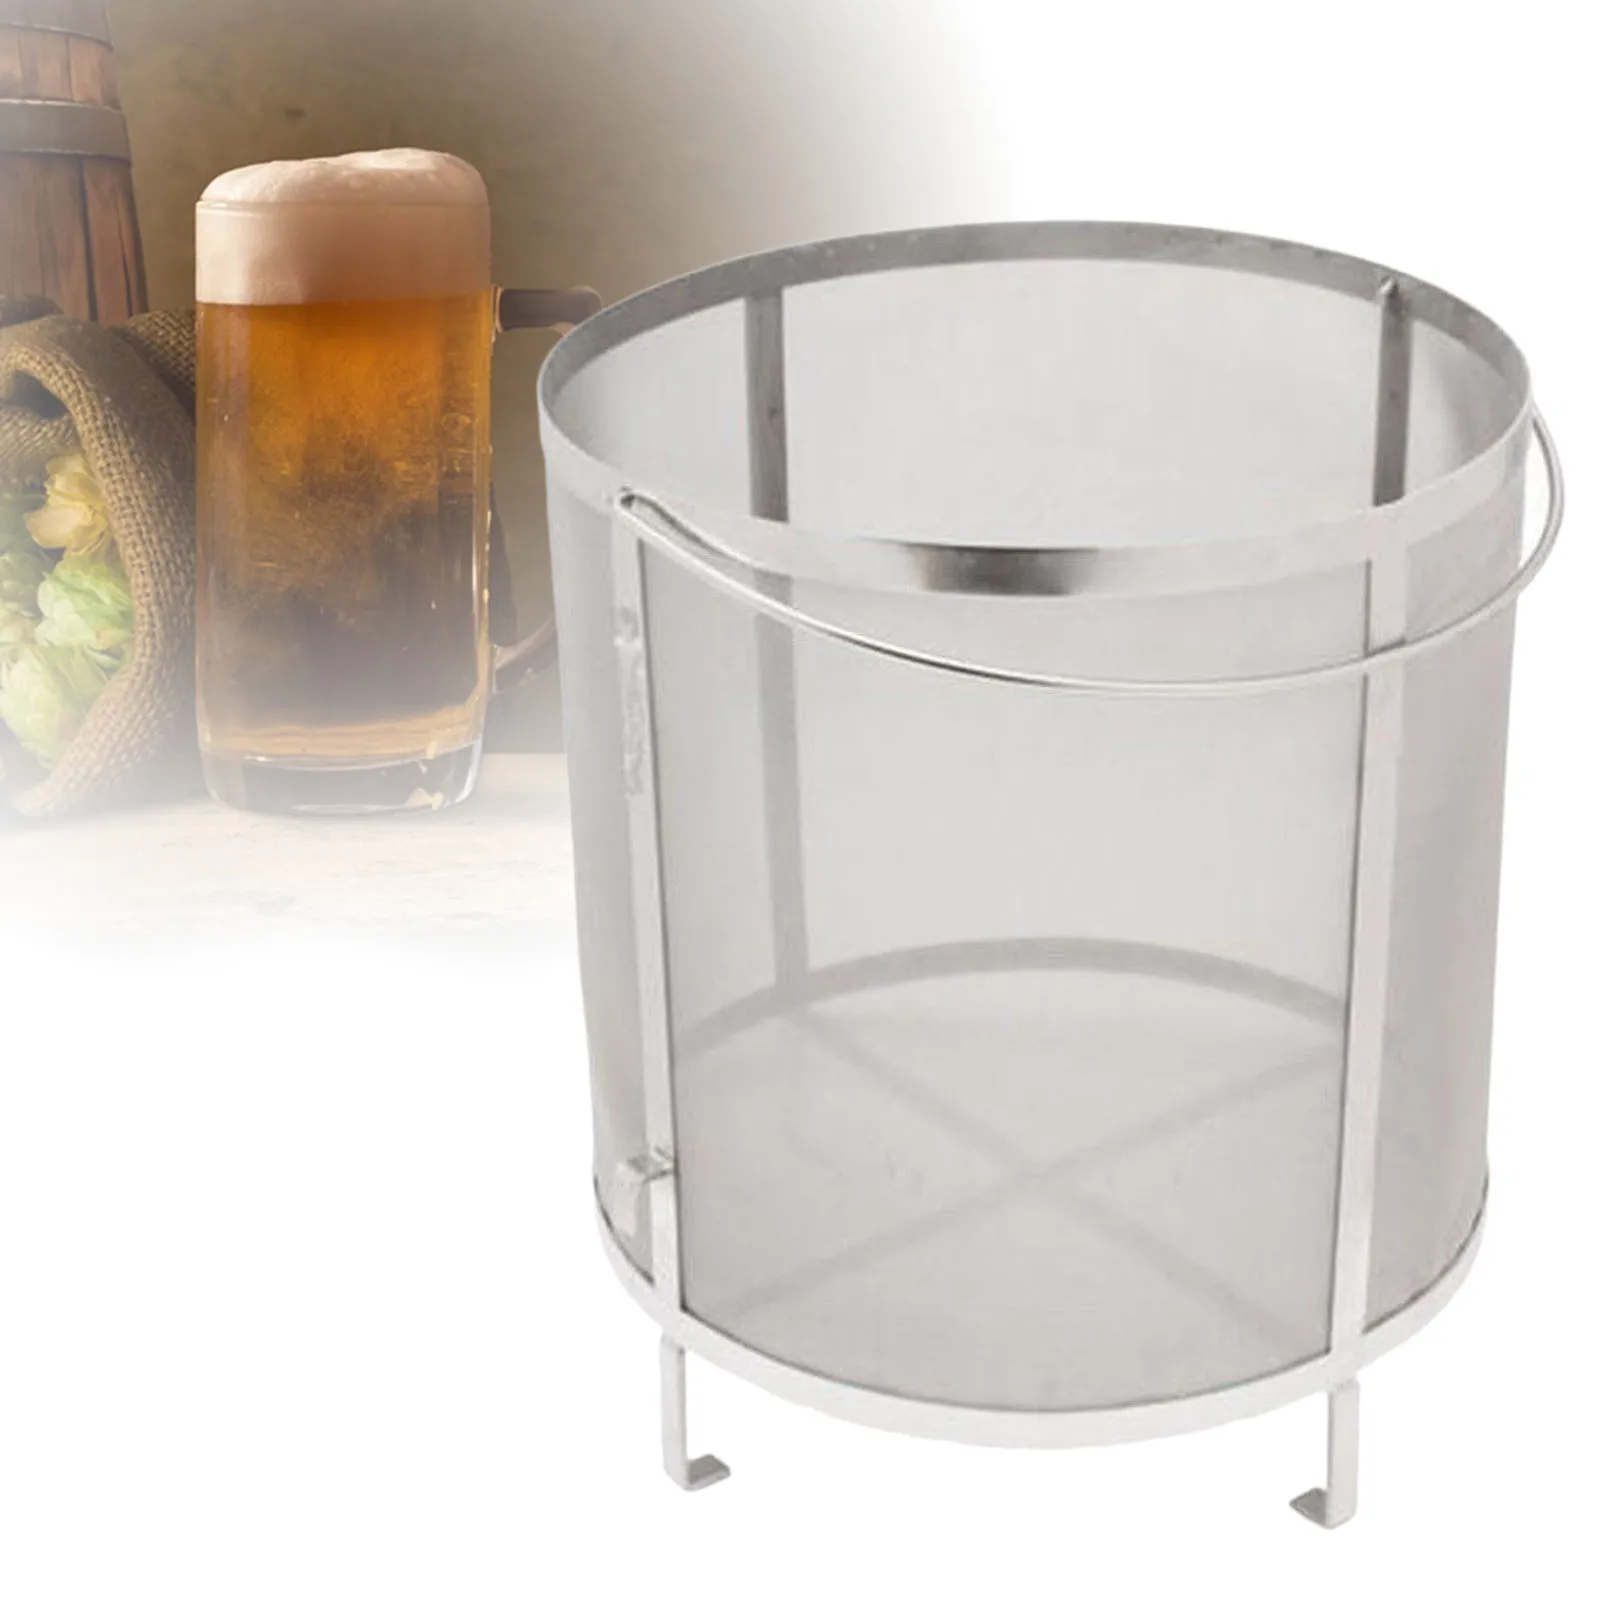 304 Stainless Steel Beer Wine House Home Brew Filter Basket Filter Bag for  Jelly Jams Homebrew Barrel Strainer Barware Bar Tool - AliExpress